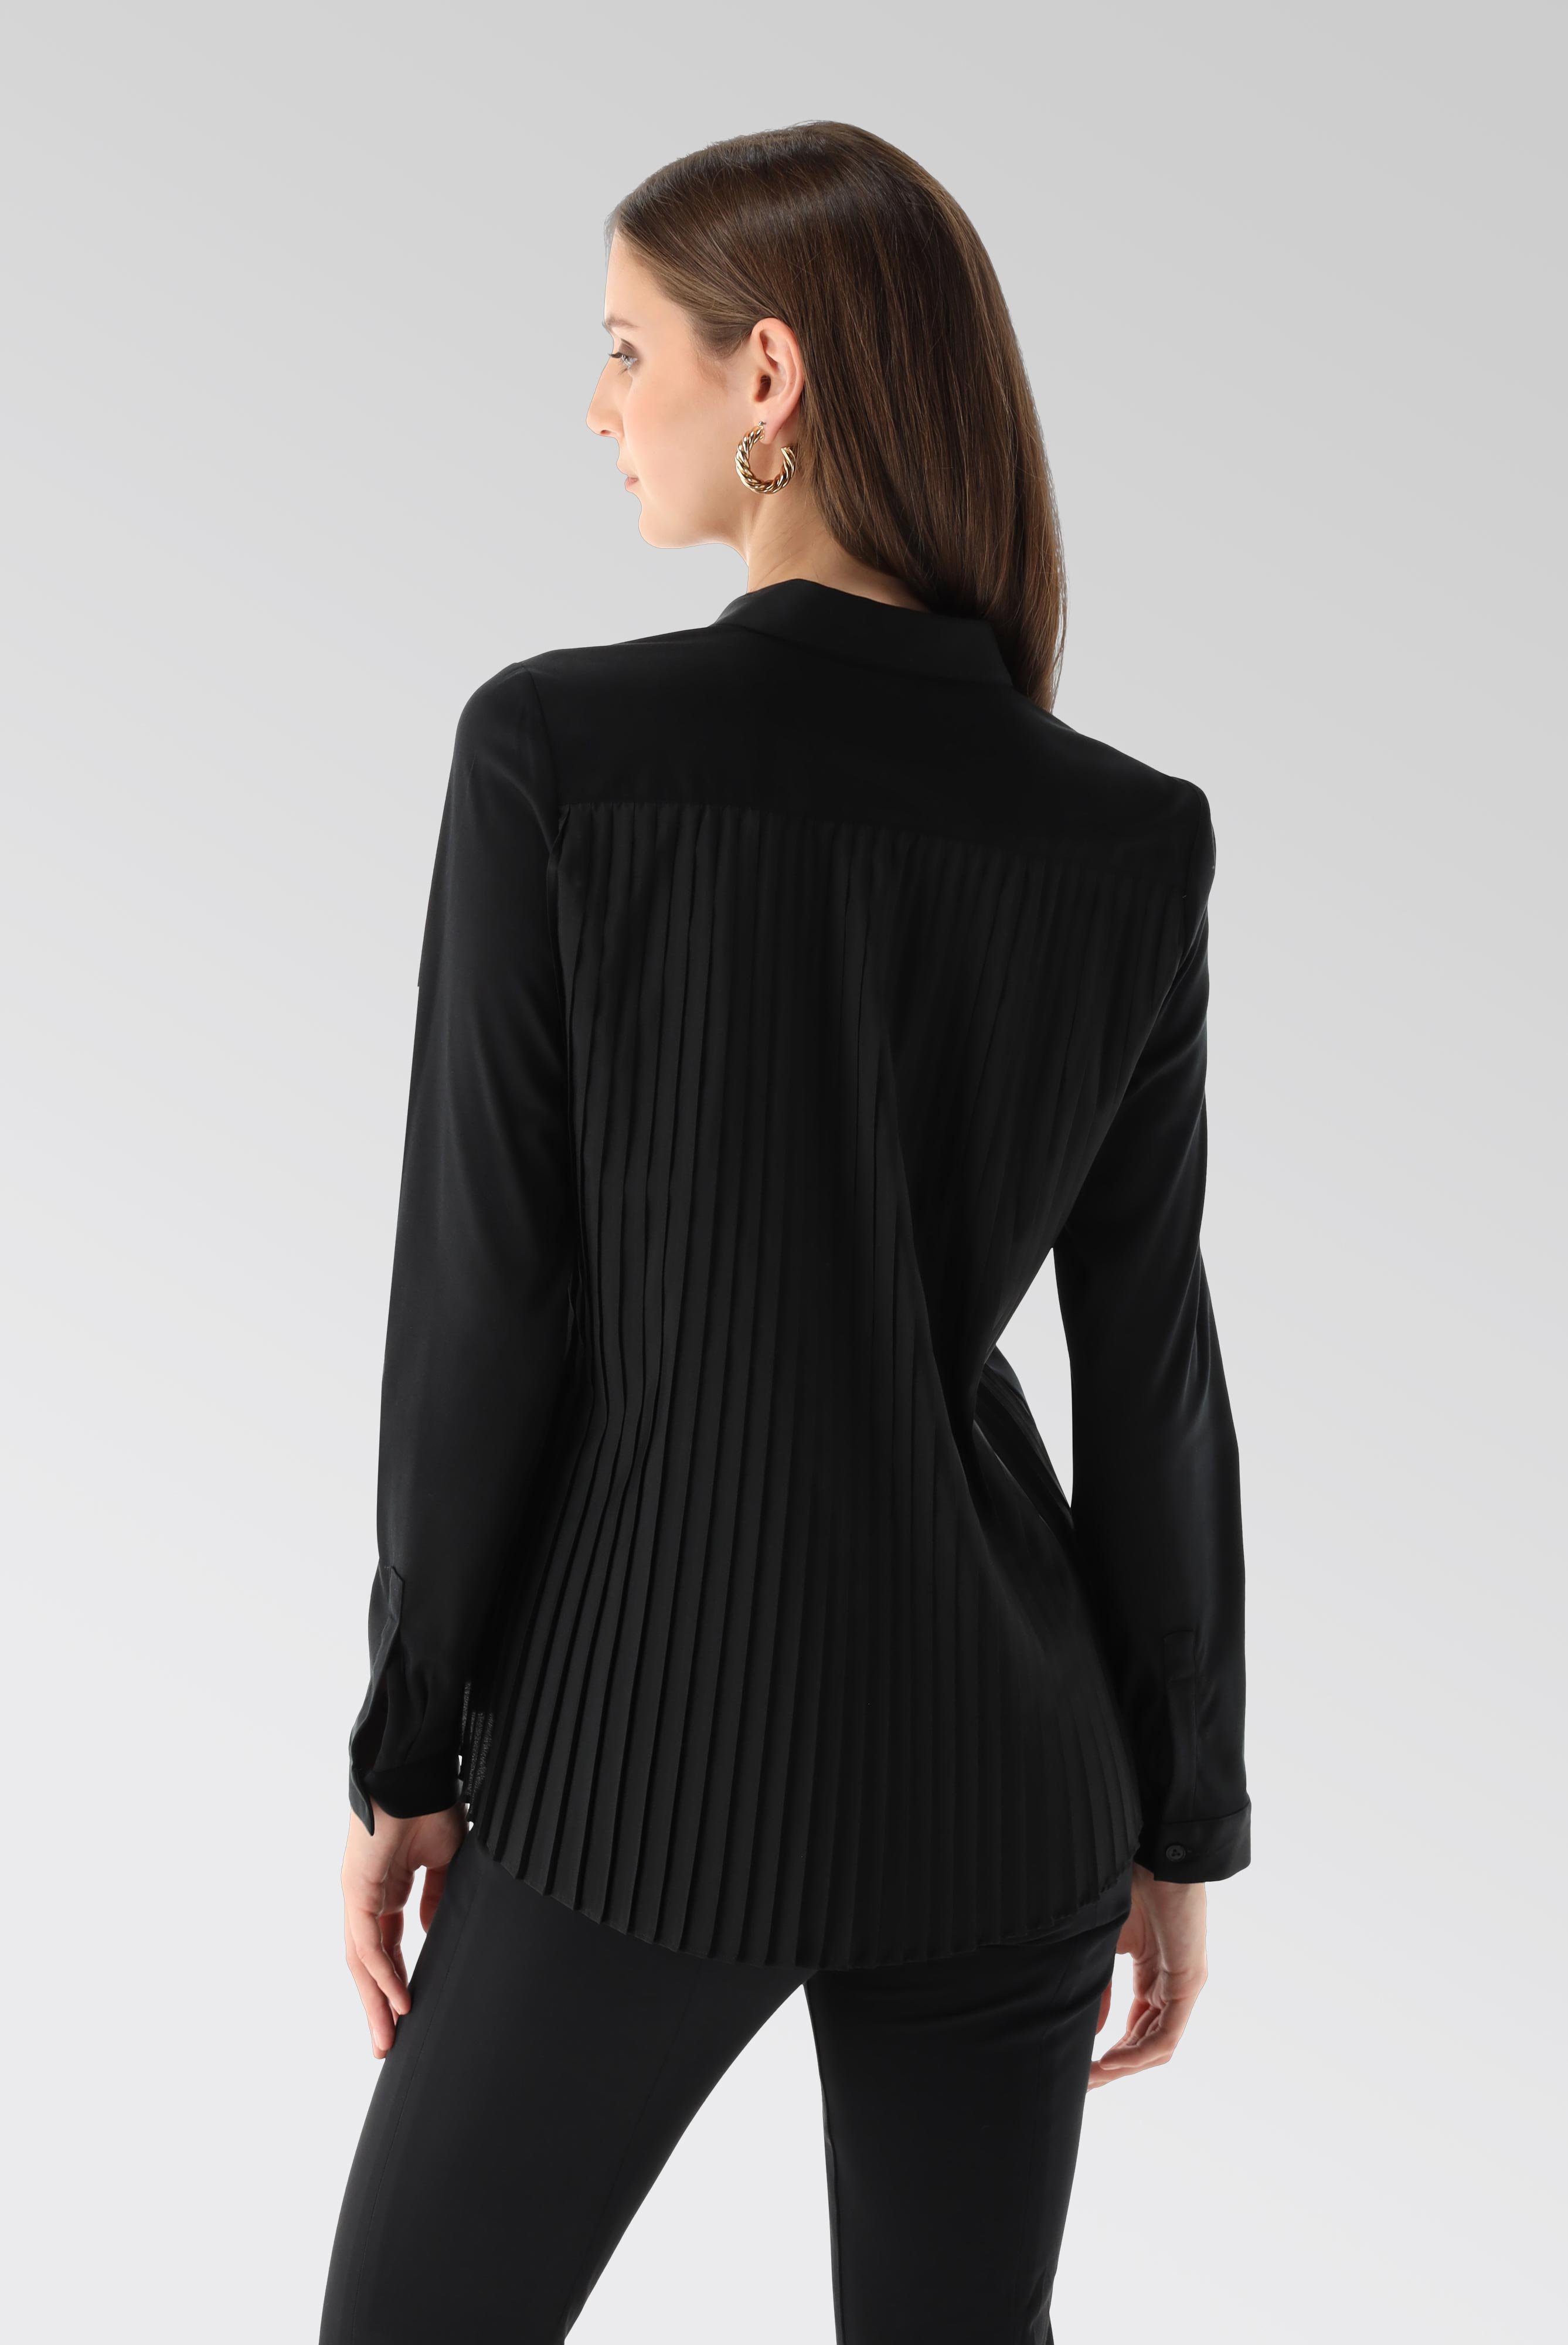 Jersey Blouses+Swiss Cotton Blouse with Pleated Back+05.6703.18.180031.099.46